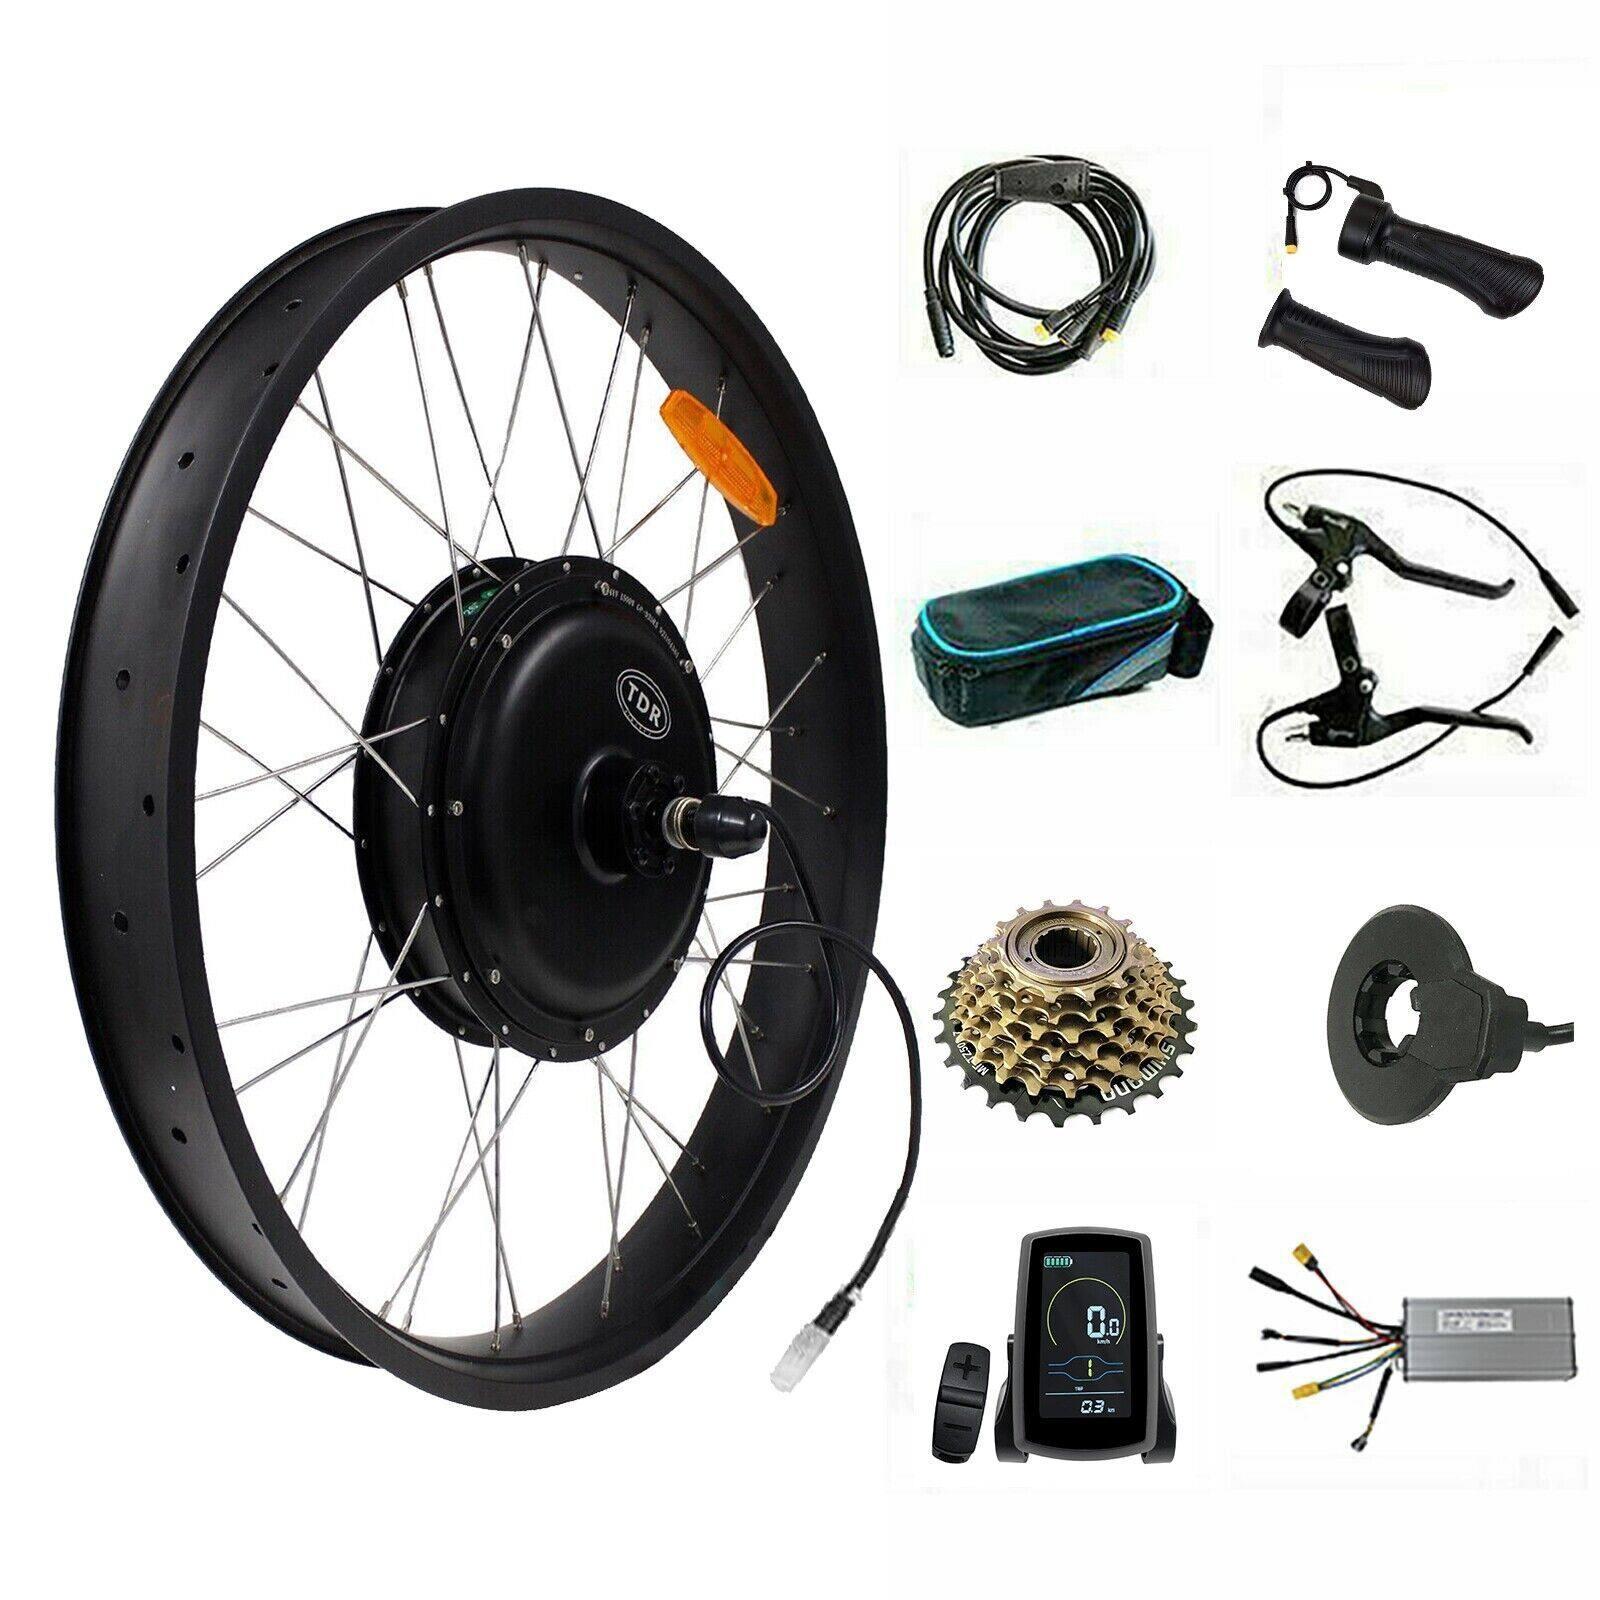 1500W 26" Fat Bike 4.0 Tyre Rear Hub Electric Bike eBike Conversion Kit (Battery & Charger Not Included)